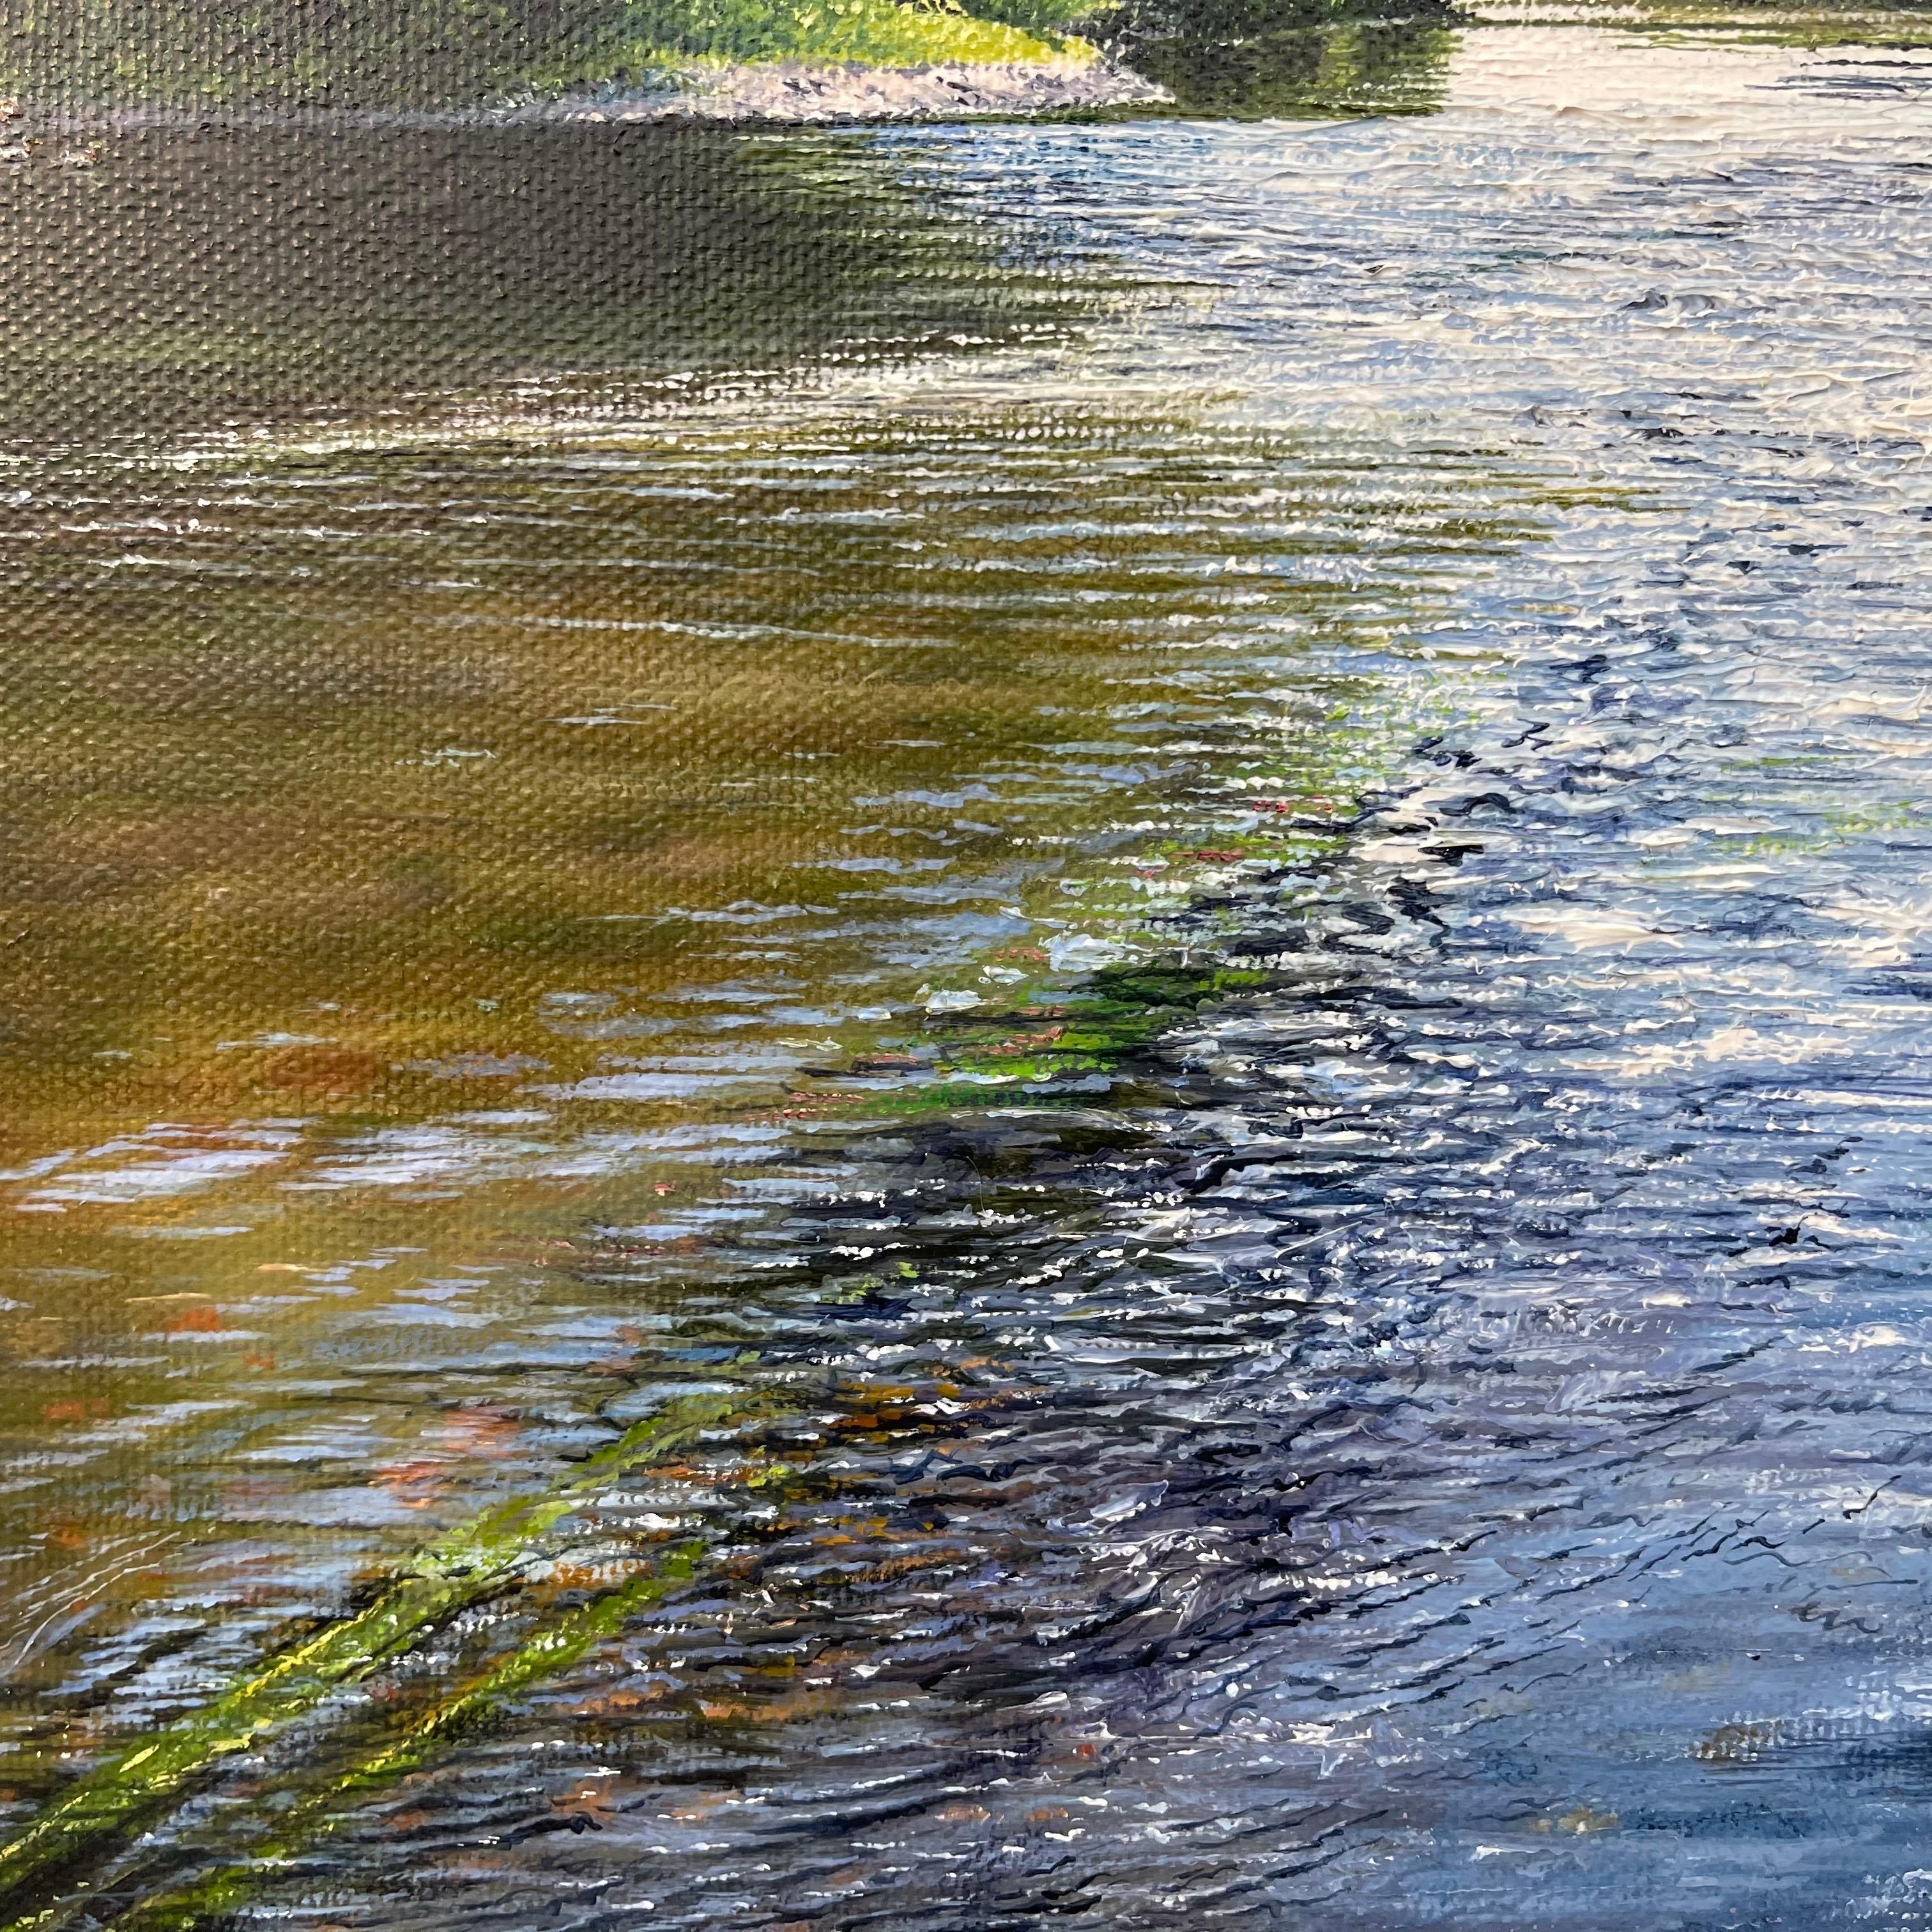 Light Reflections on the River Landscape Painting by British Photorealist Artist 7